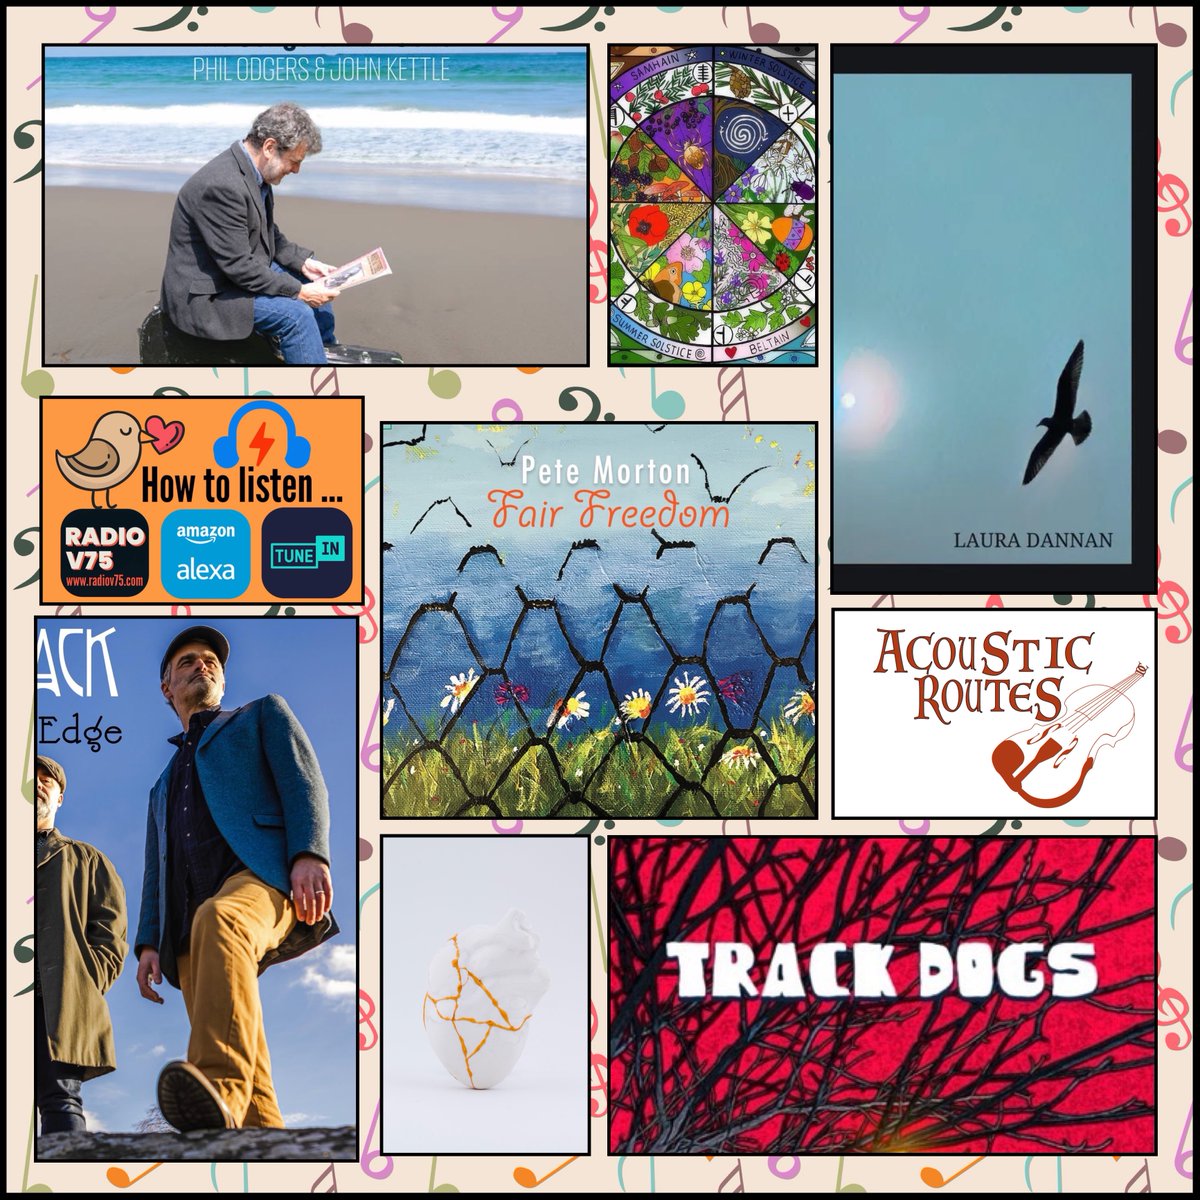 On this week’s @AcousticRoutes, show 493, the featured album is from @petemortonmusic & there will be music from @TangleJackBand @lauradannan @smalltownjones @TheCooleysBand @TrackDogsMusic @SwillOdgers @FaunOfficial and more. Tune in to radiov75.com 7pm U.K. time 2day